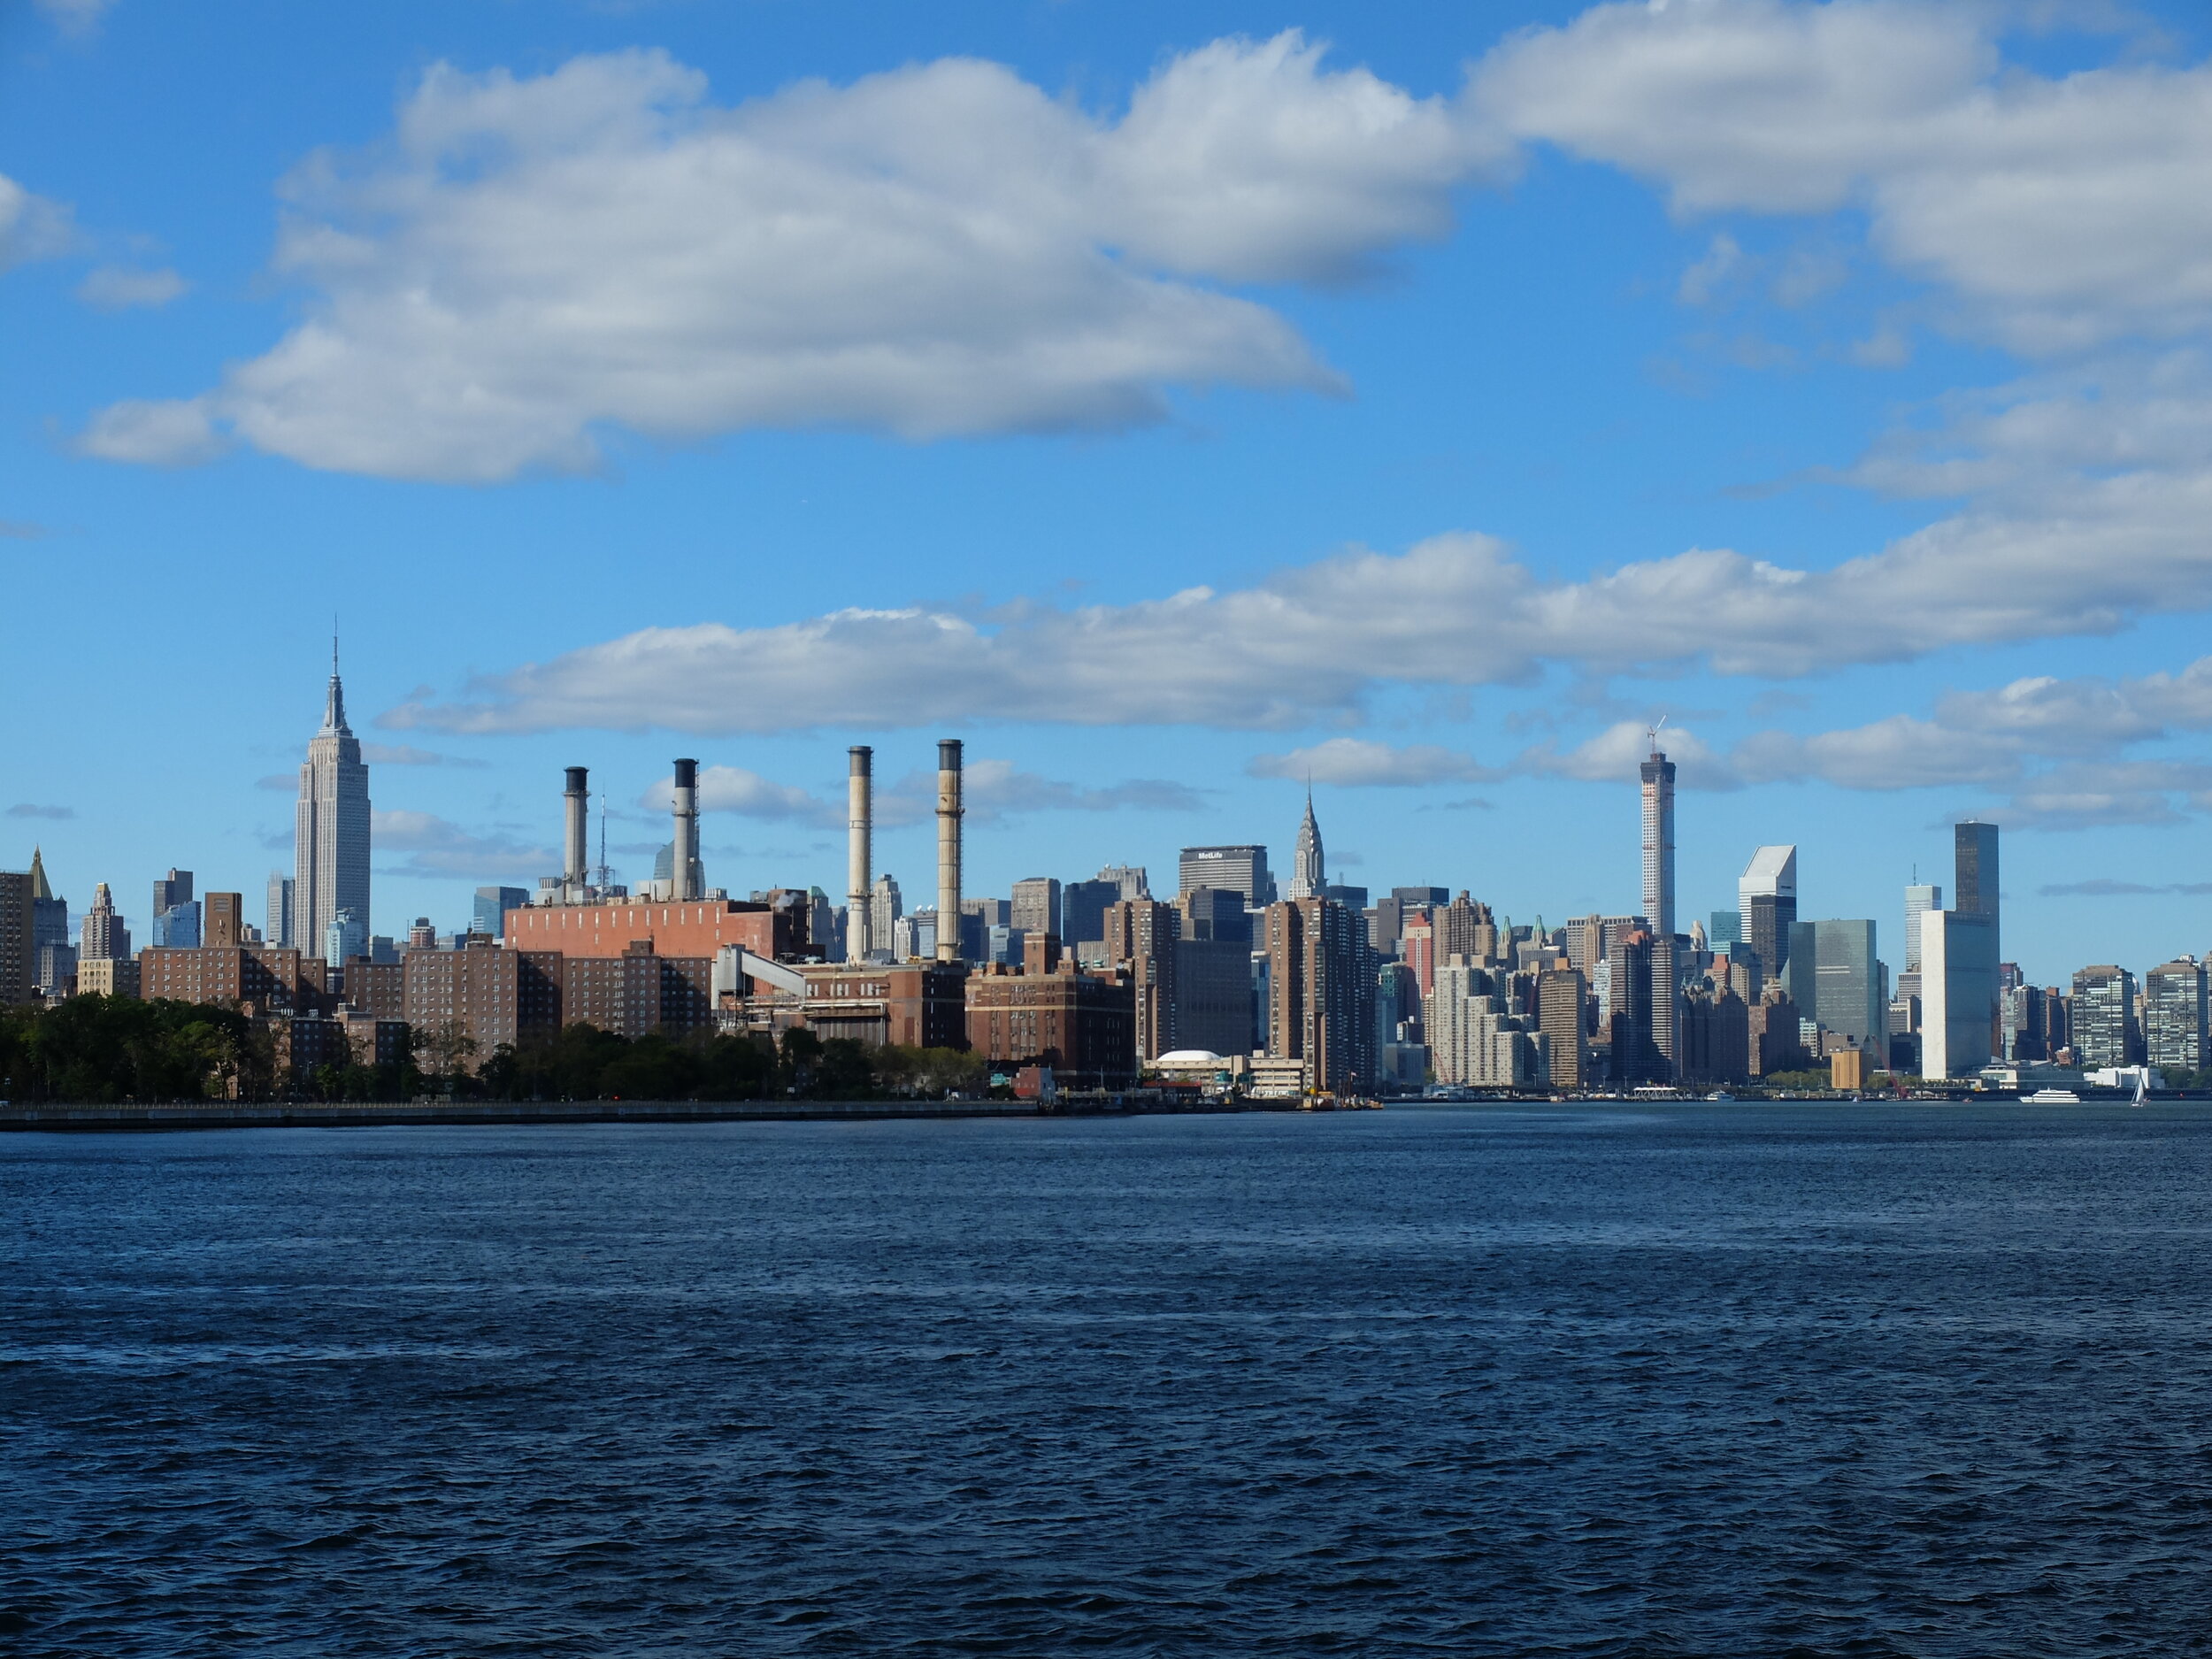 From the East River Ferry.